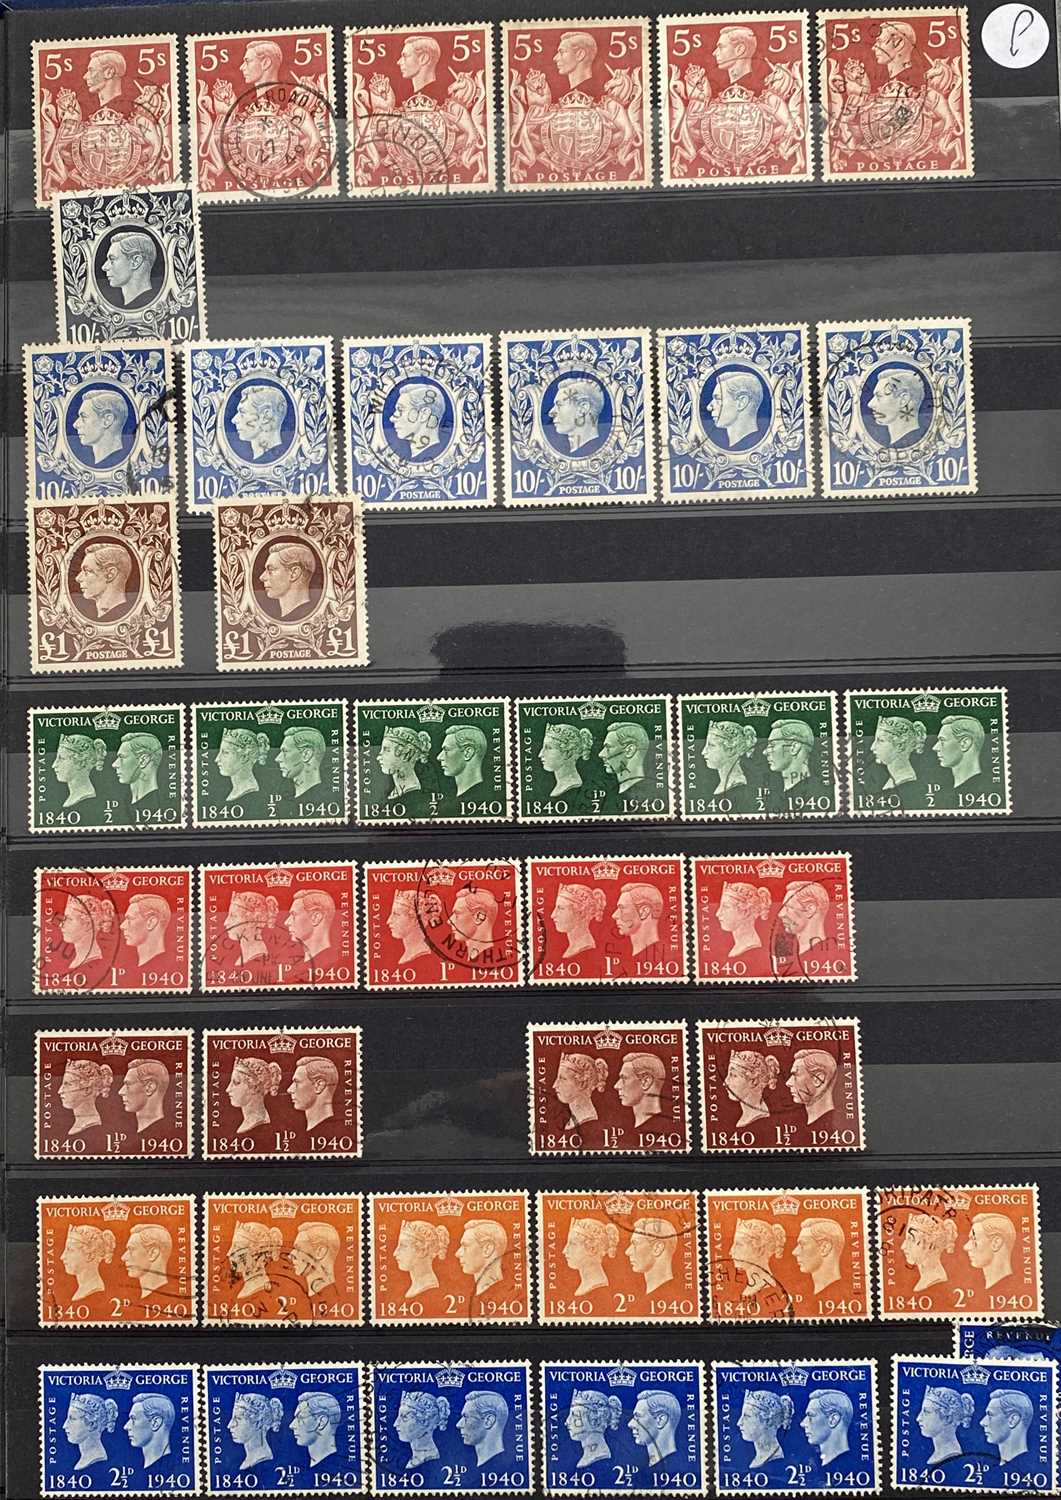 OFFERED WITH LOT 51 - GB STOCKBOOK - GV - QEII, mainly fine used or unmounted mint, GV1 high - Image 13 of 16